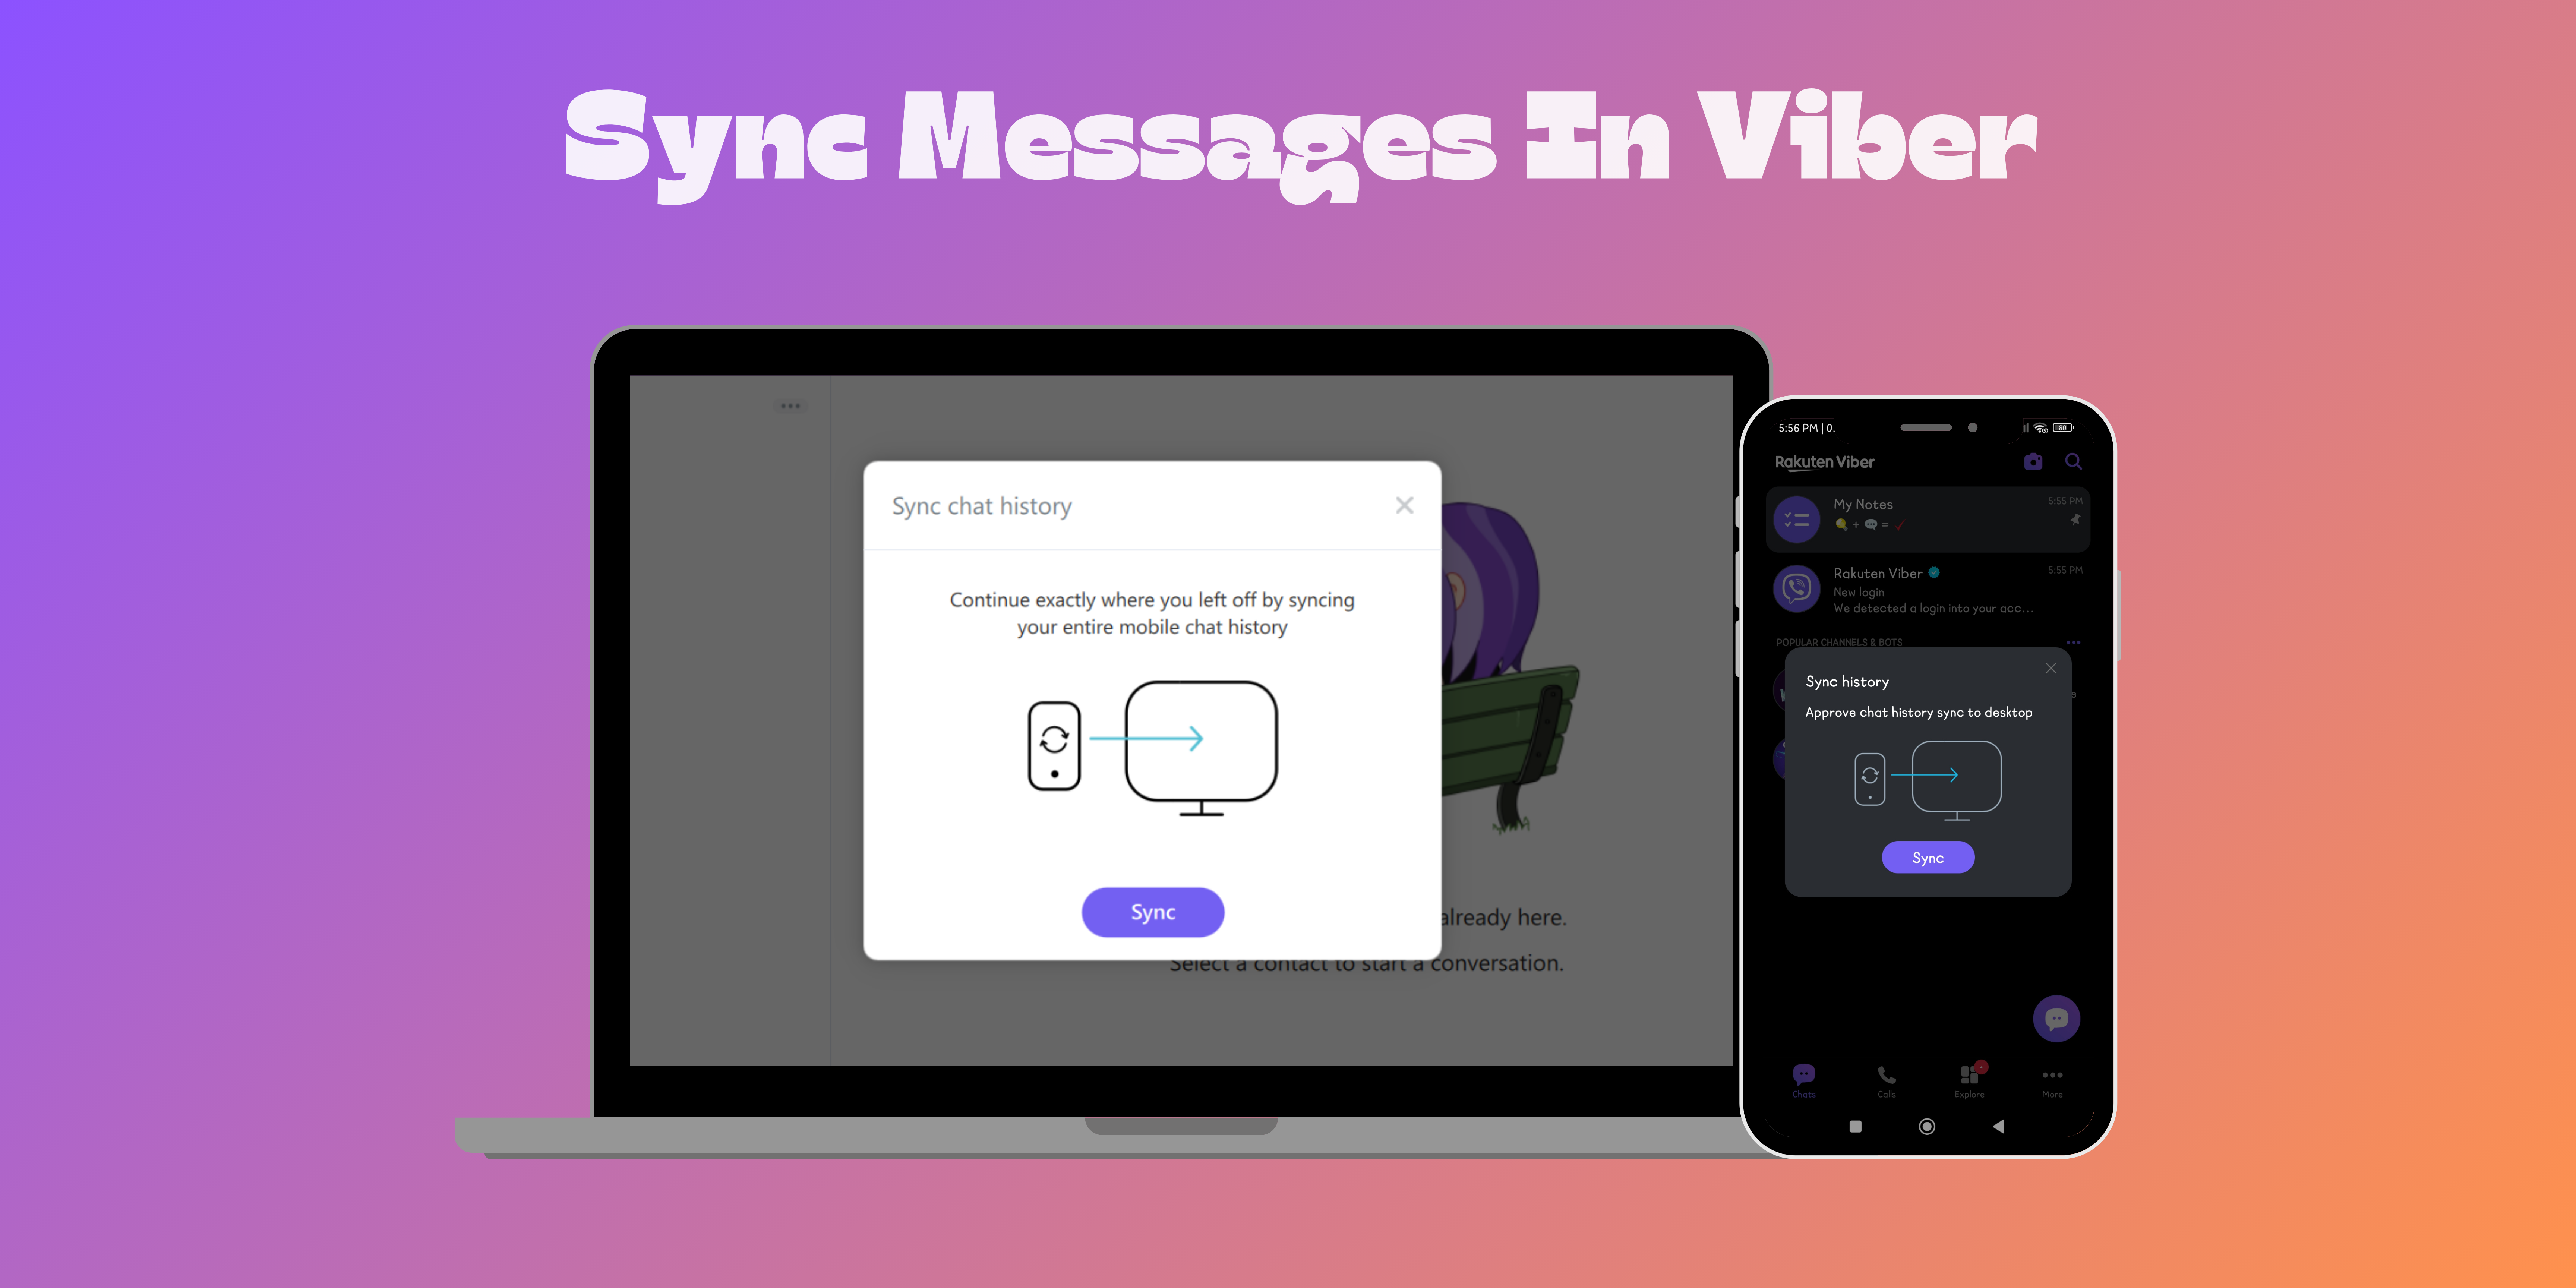 How to sync messages in Viber